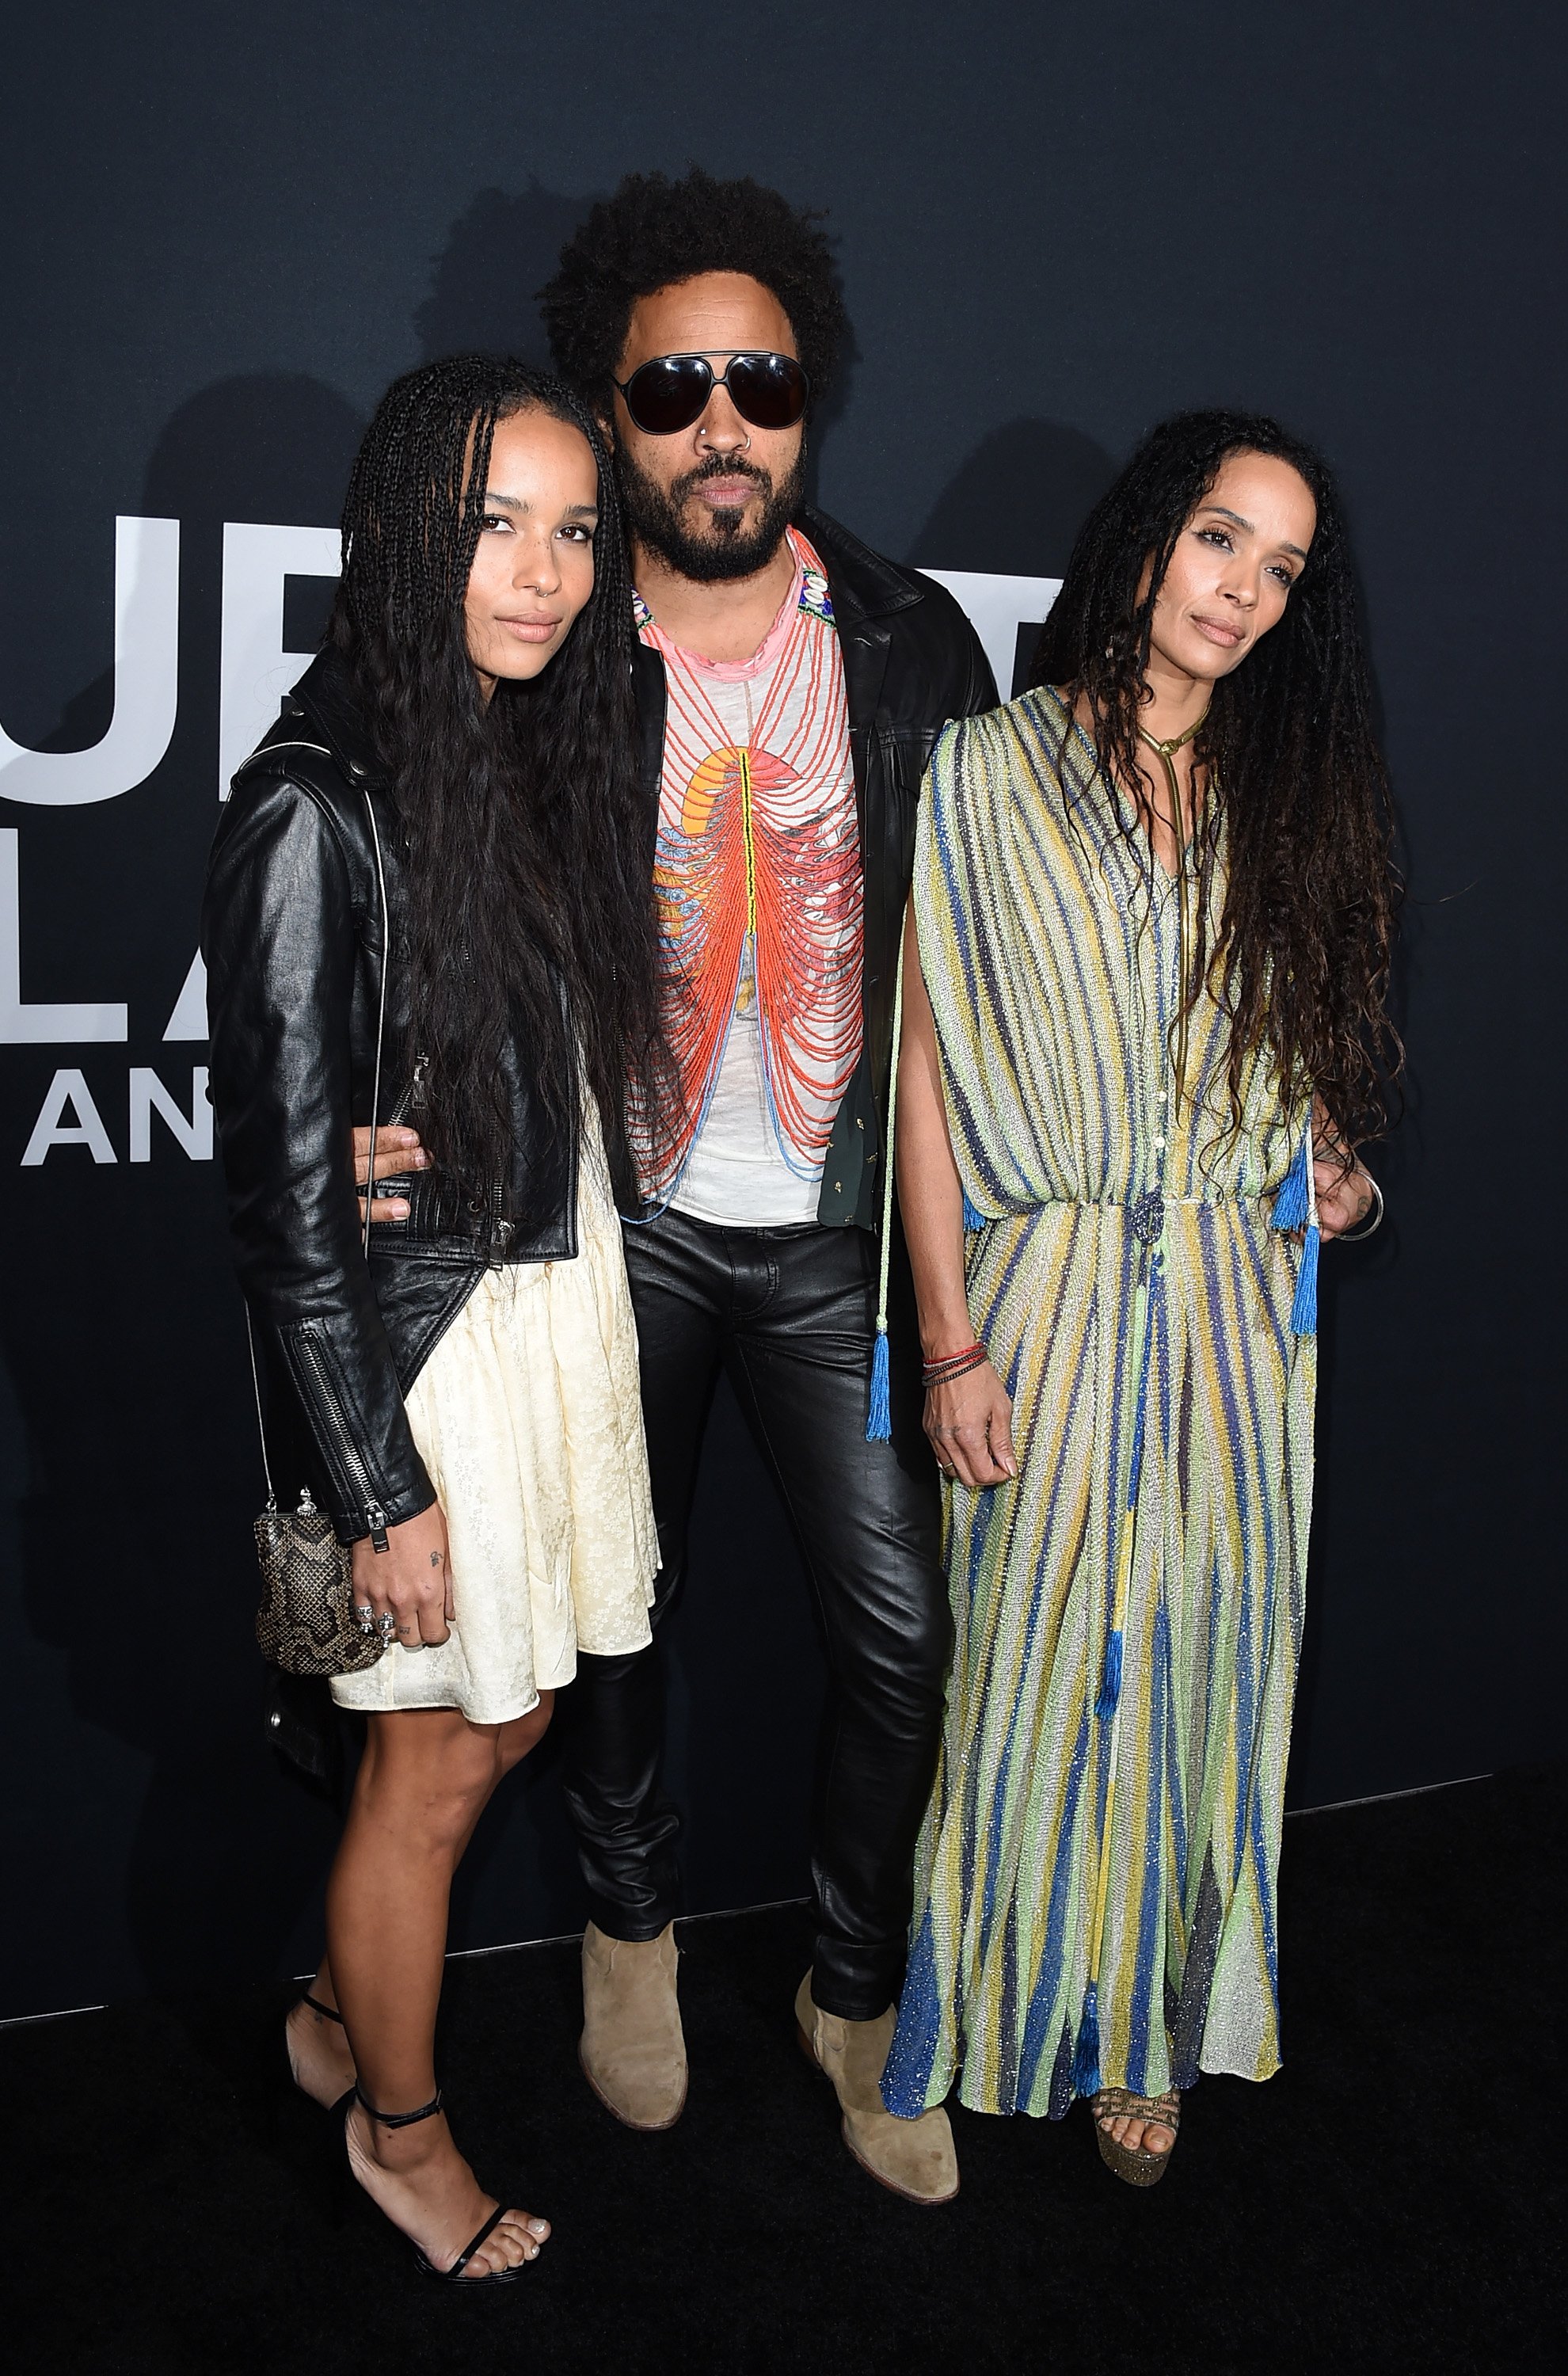 Lenny Kravitz with daughter Zoe and ex-wife Lisa Bonet attend the Saint Laurent Show in Los Angeles, California on Feburary 10, 2016 | Photo: Getty Images